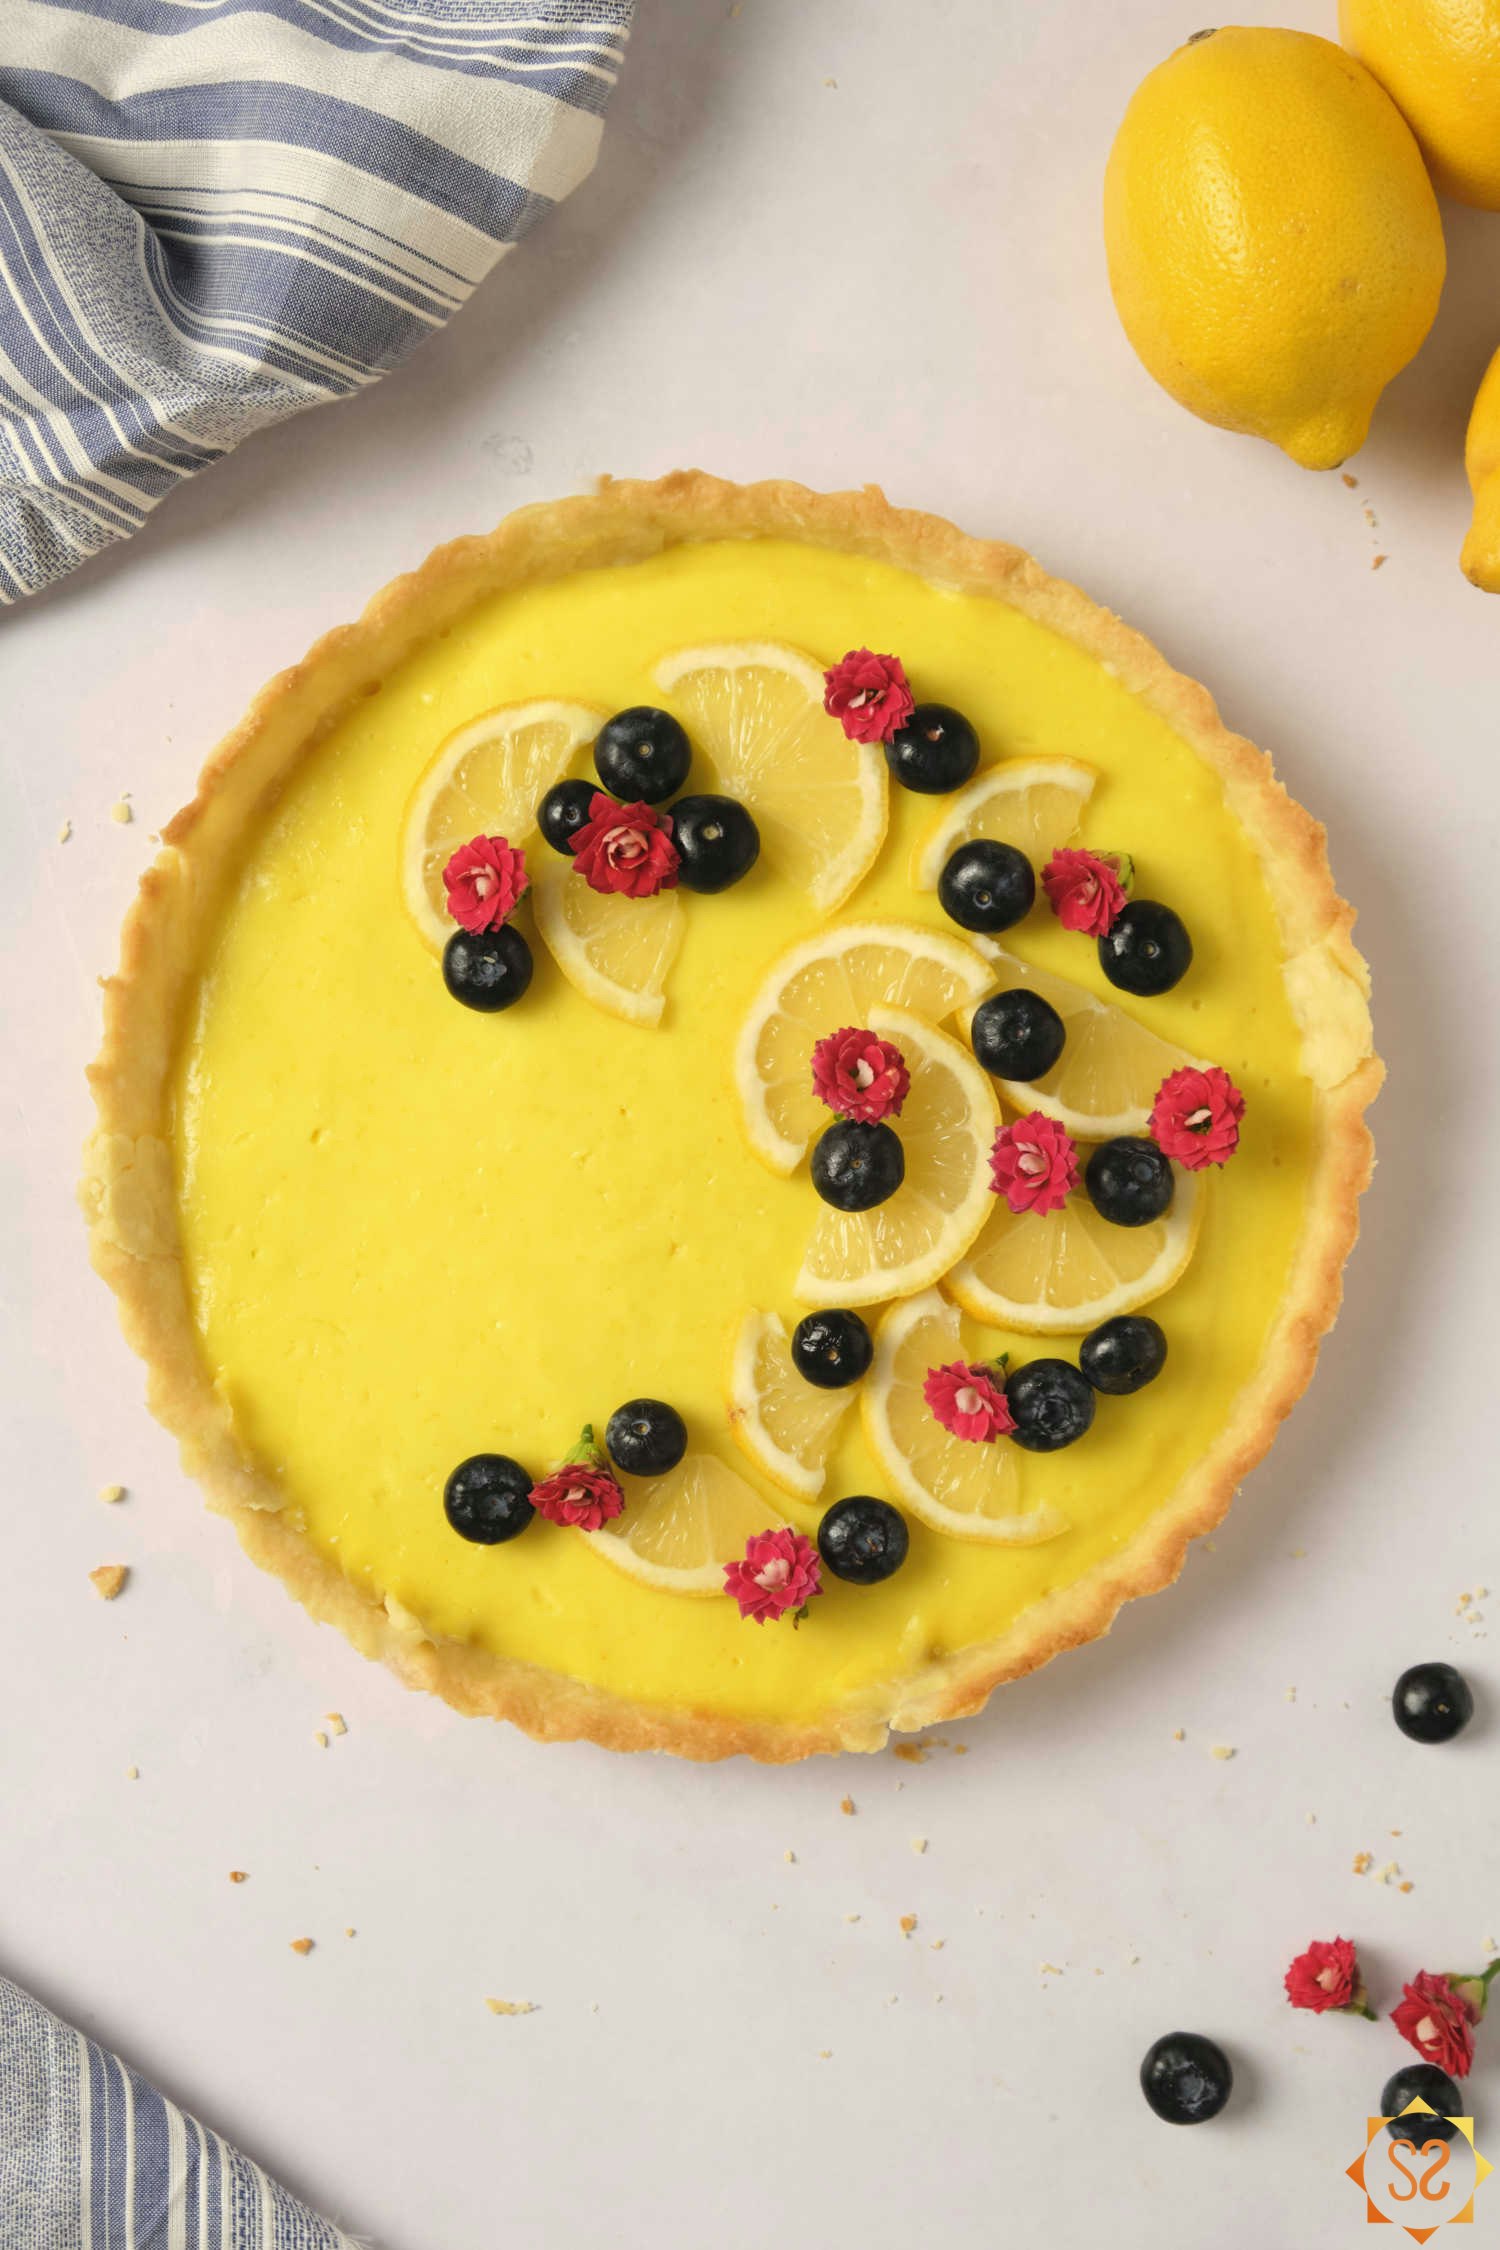 A top-down view of a vegan lemon tart topped with flowers and blueberries, with lemons and a kitchen towel to the side.